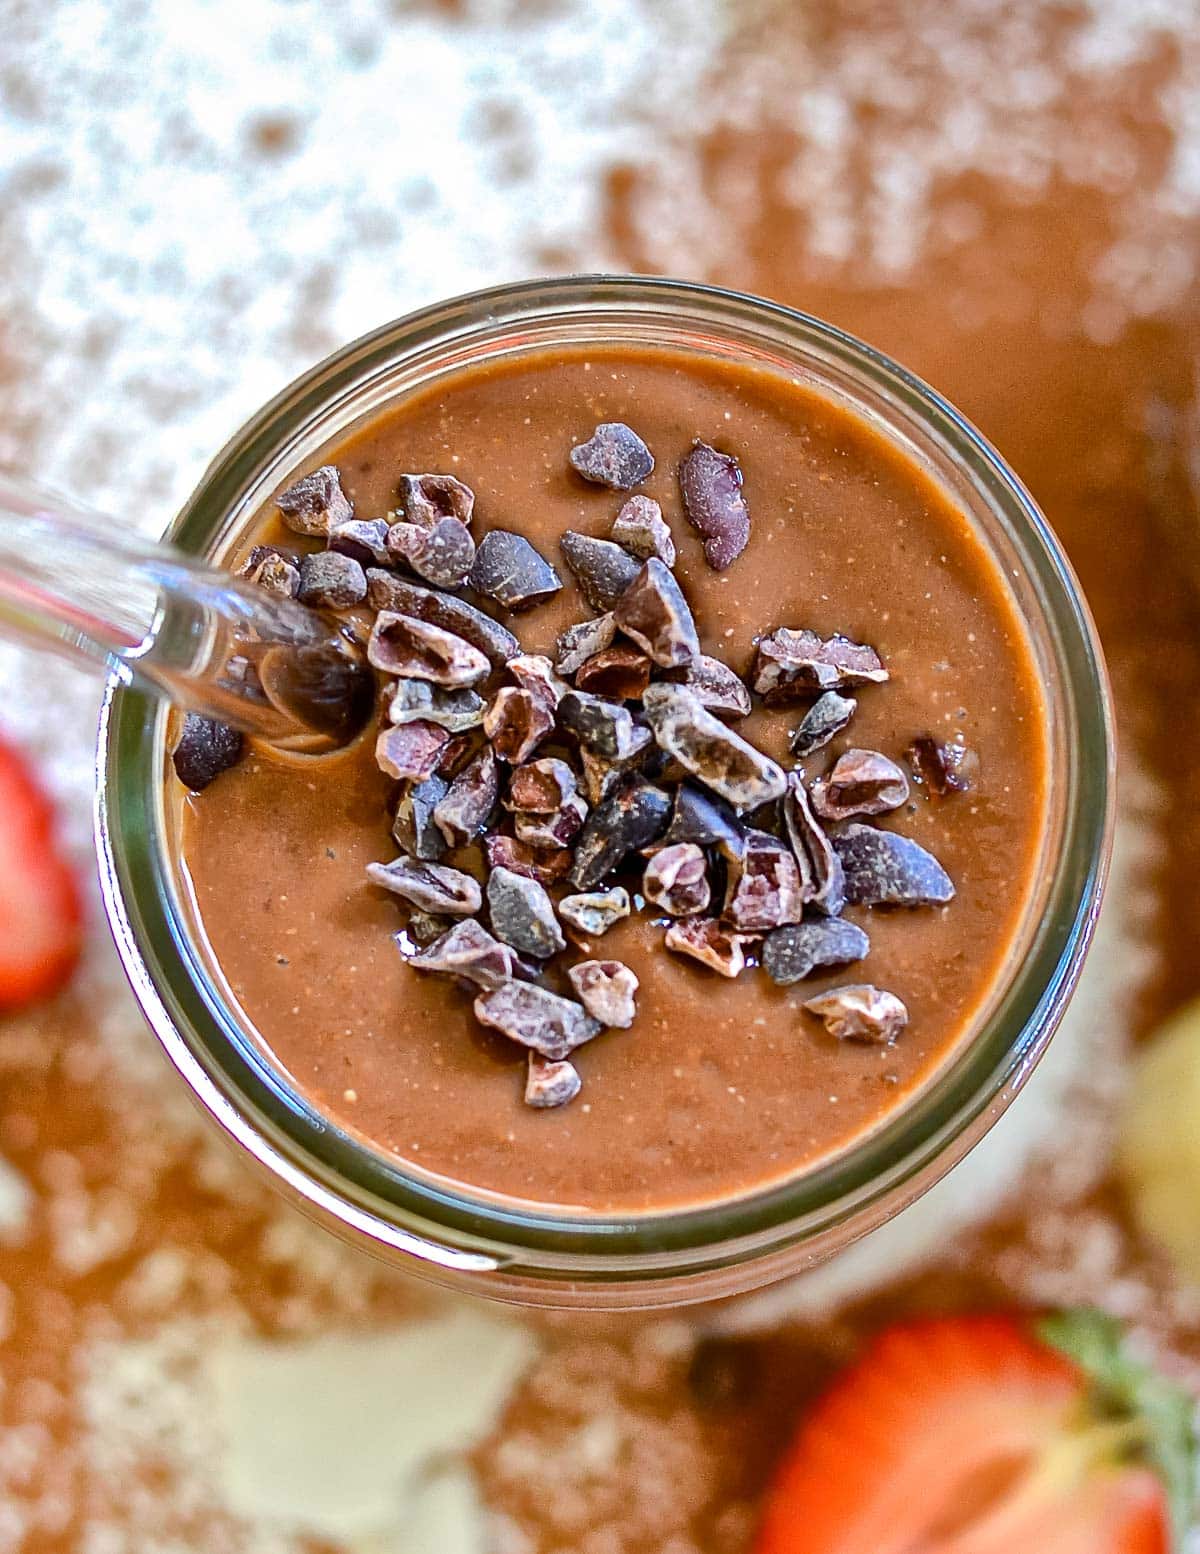 a healthy chocoalte smoothie topped with cacao nibs